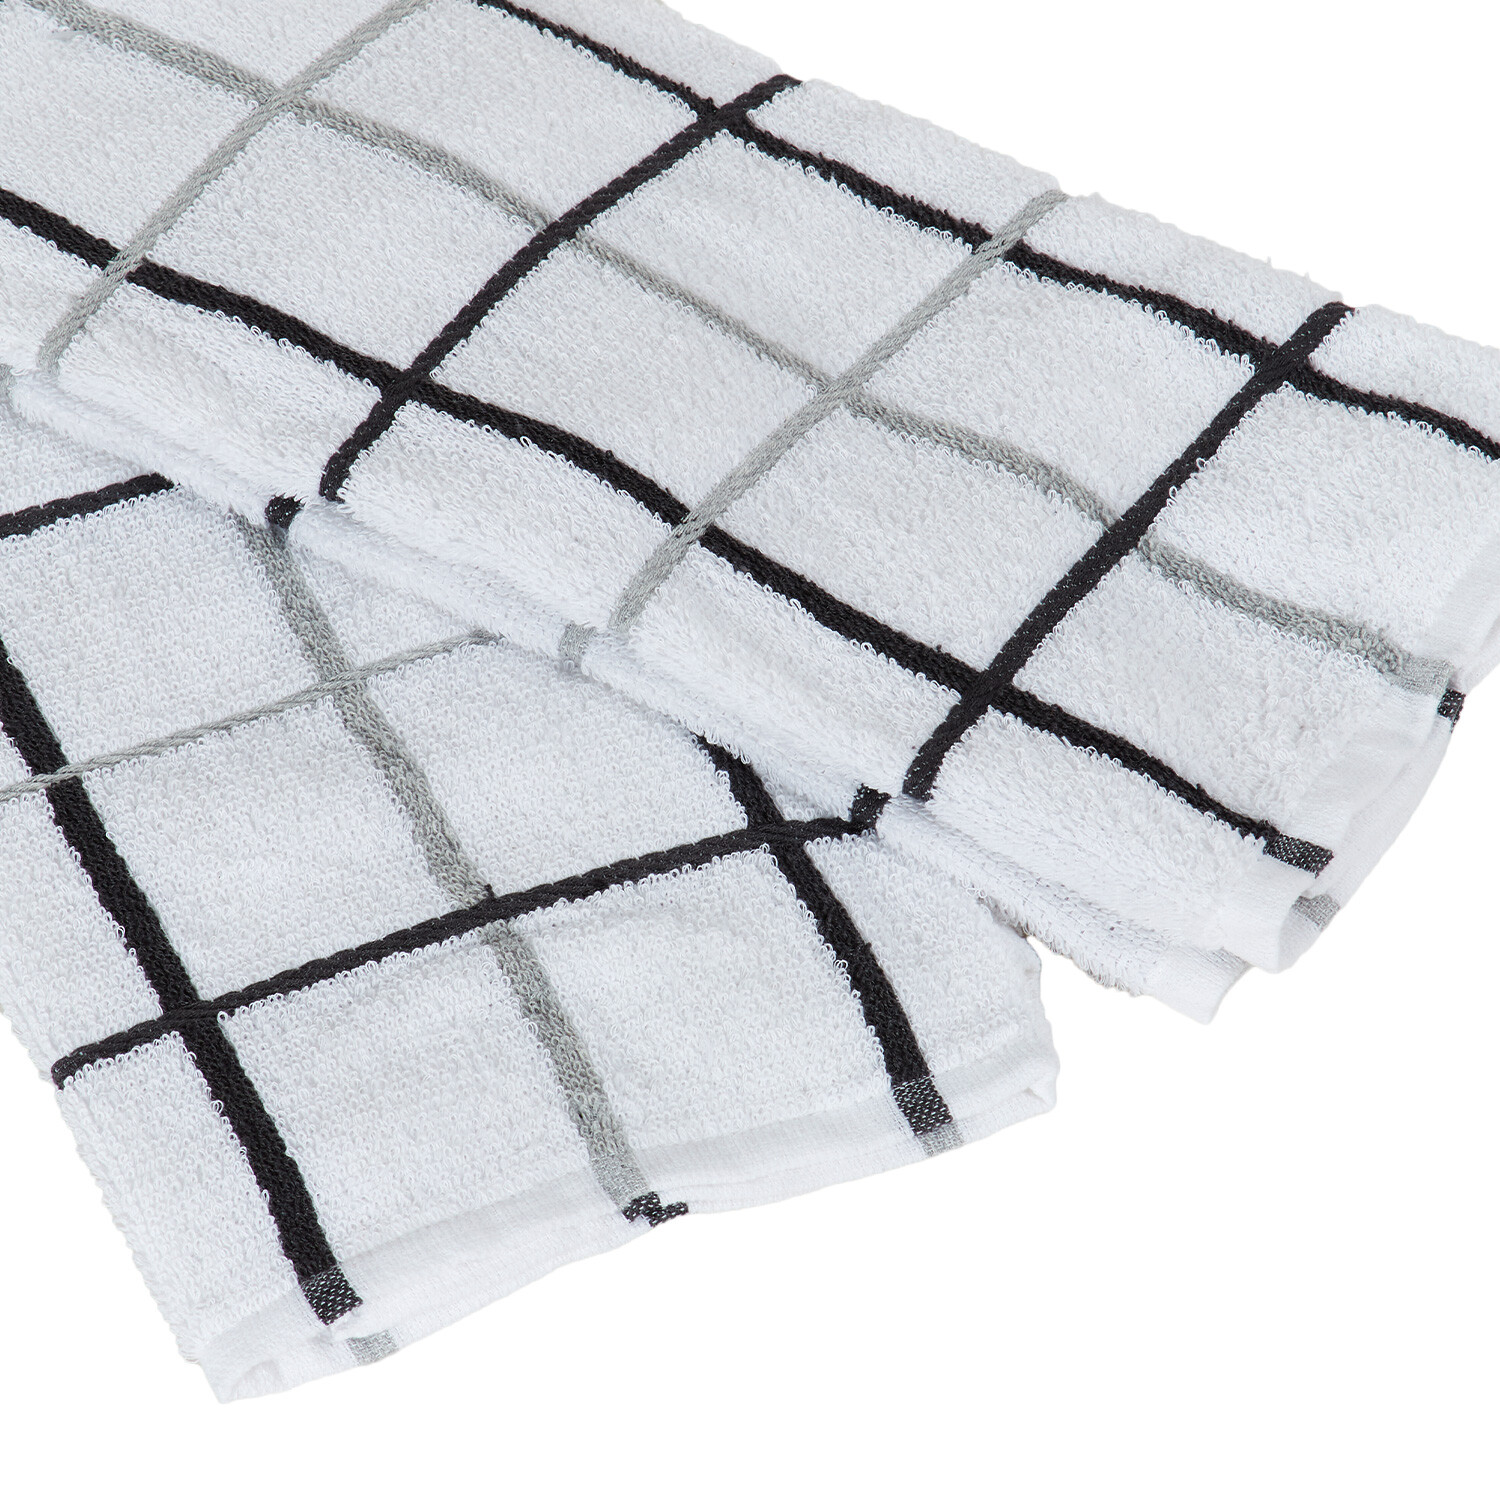 Pack of 2 Extra Large Check Tea Towels - Grey/Black Image 1